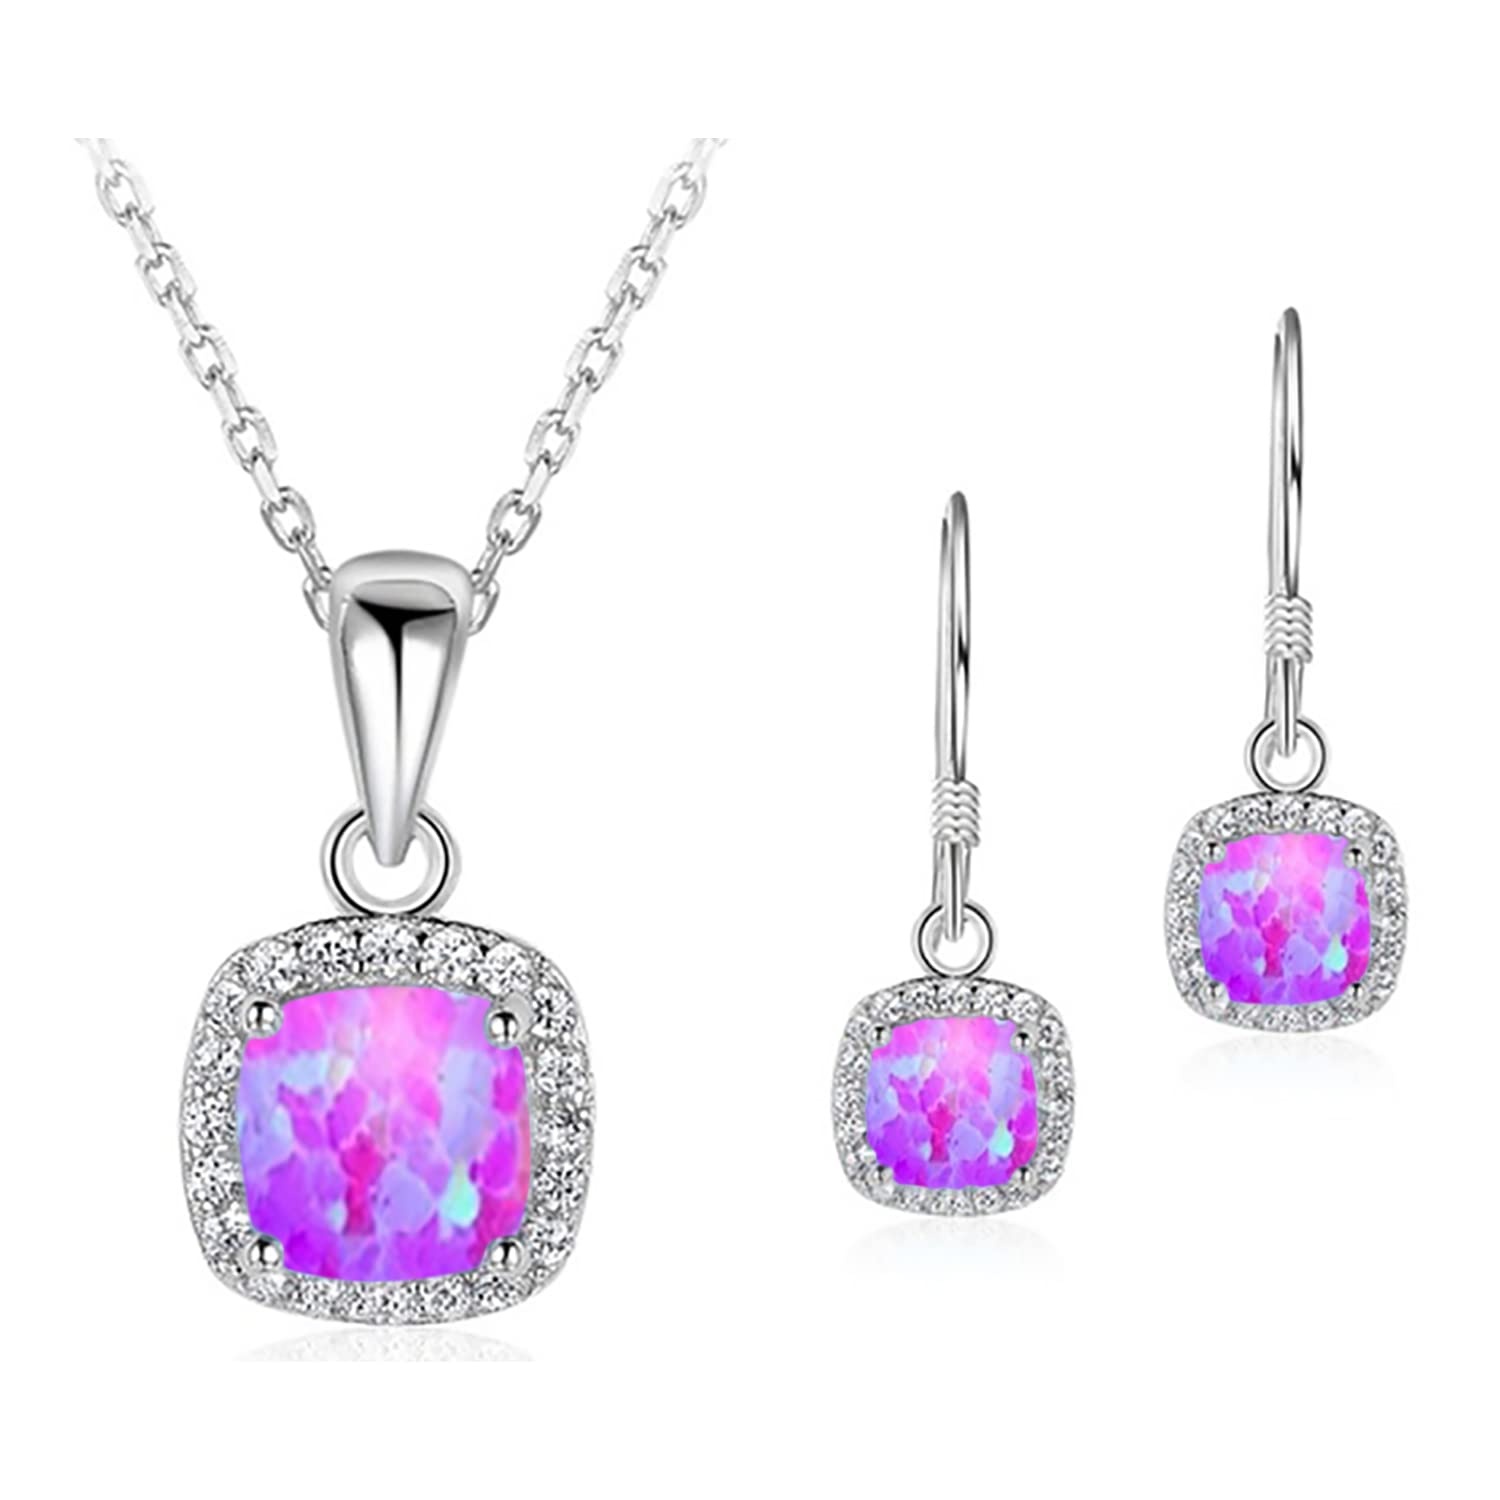 Ladies Matching Square Jewellery Set. Simulated Fire Opal Enamel and Clear Rhinestone Crystals. Necklace Pendant With Matching Drop Earrings For Women. Plus Jewellery Gift Box.